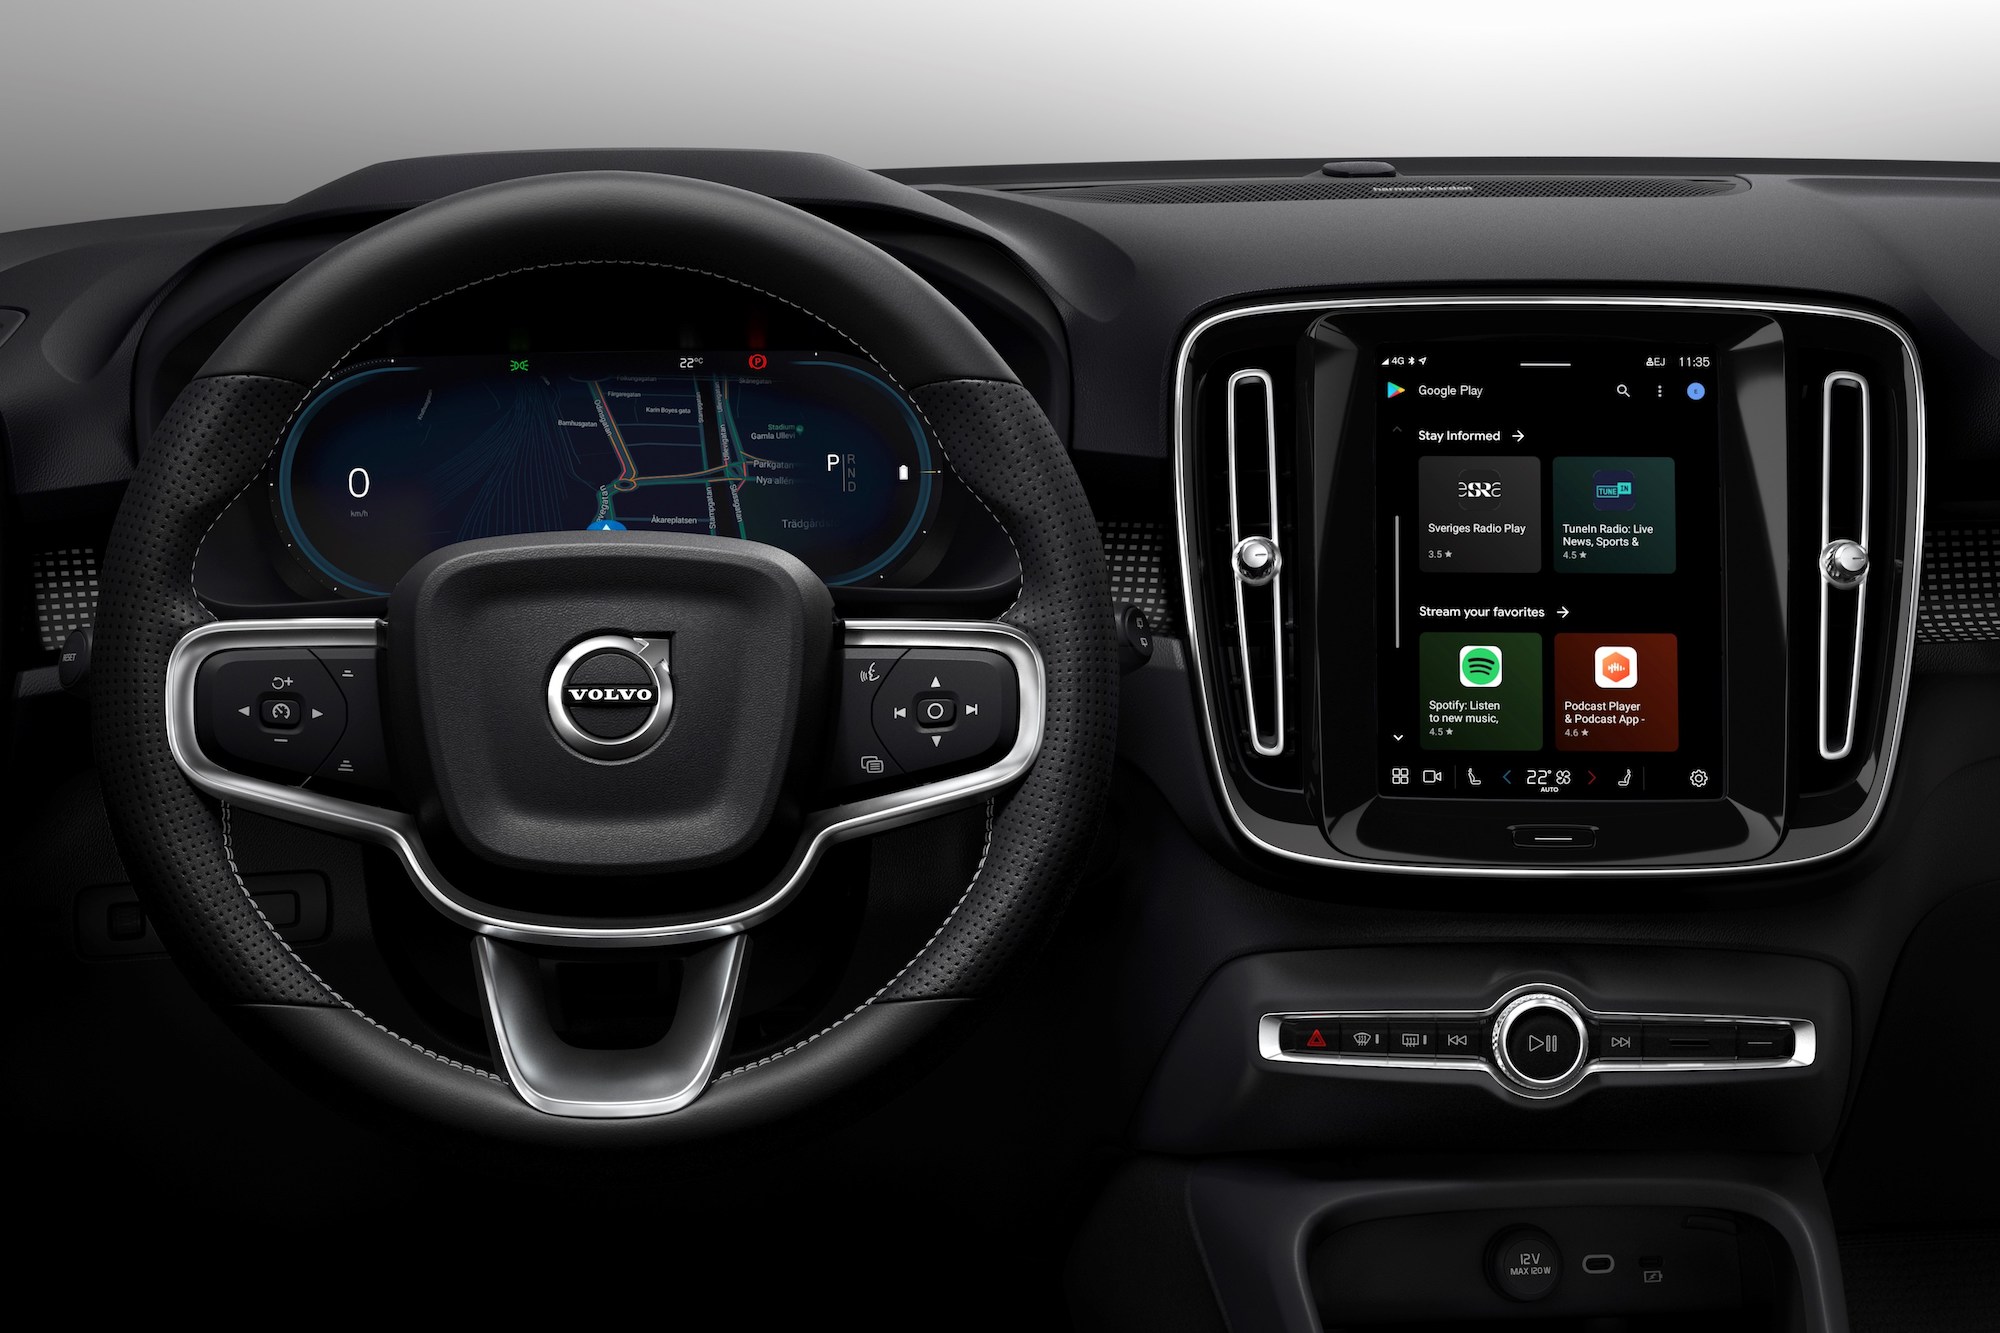 All-electric Volvo XC40 introduces brand new infotainment system